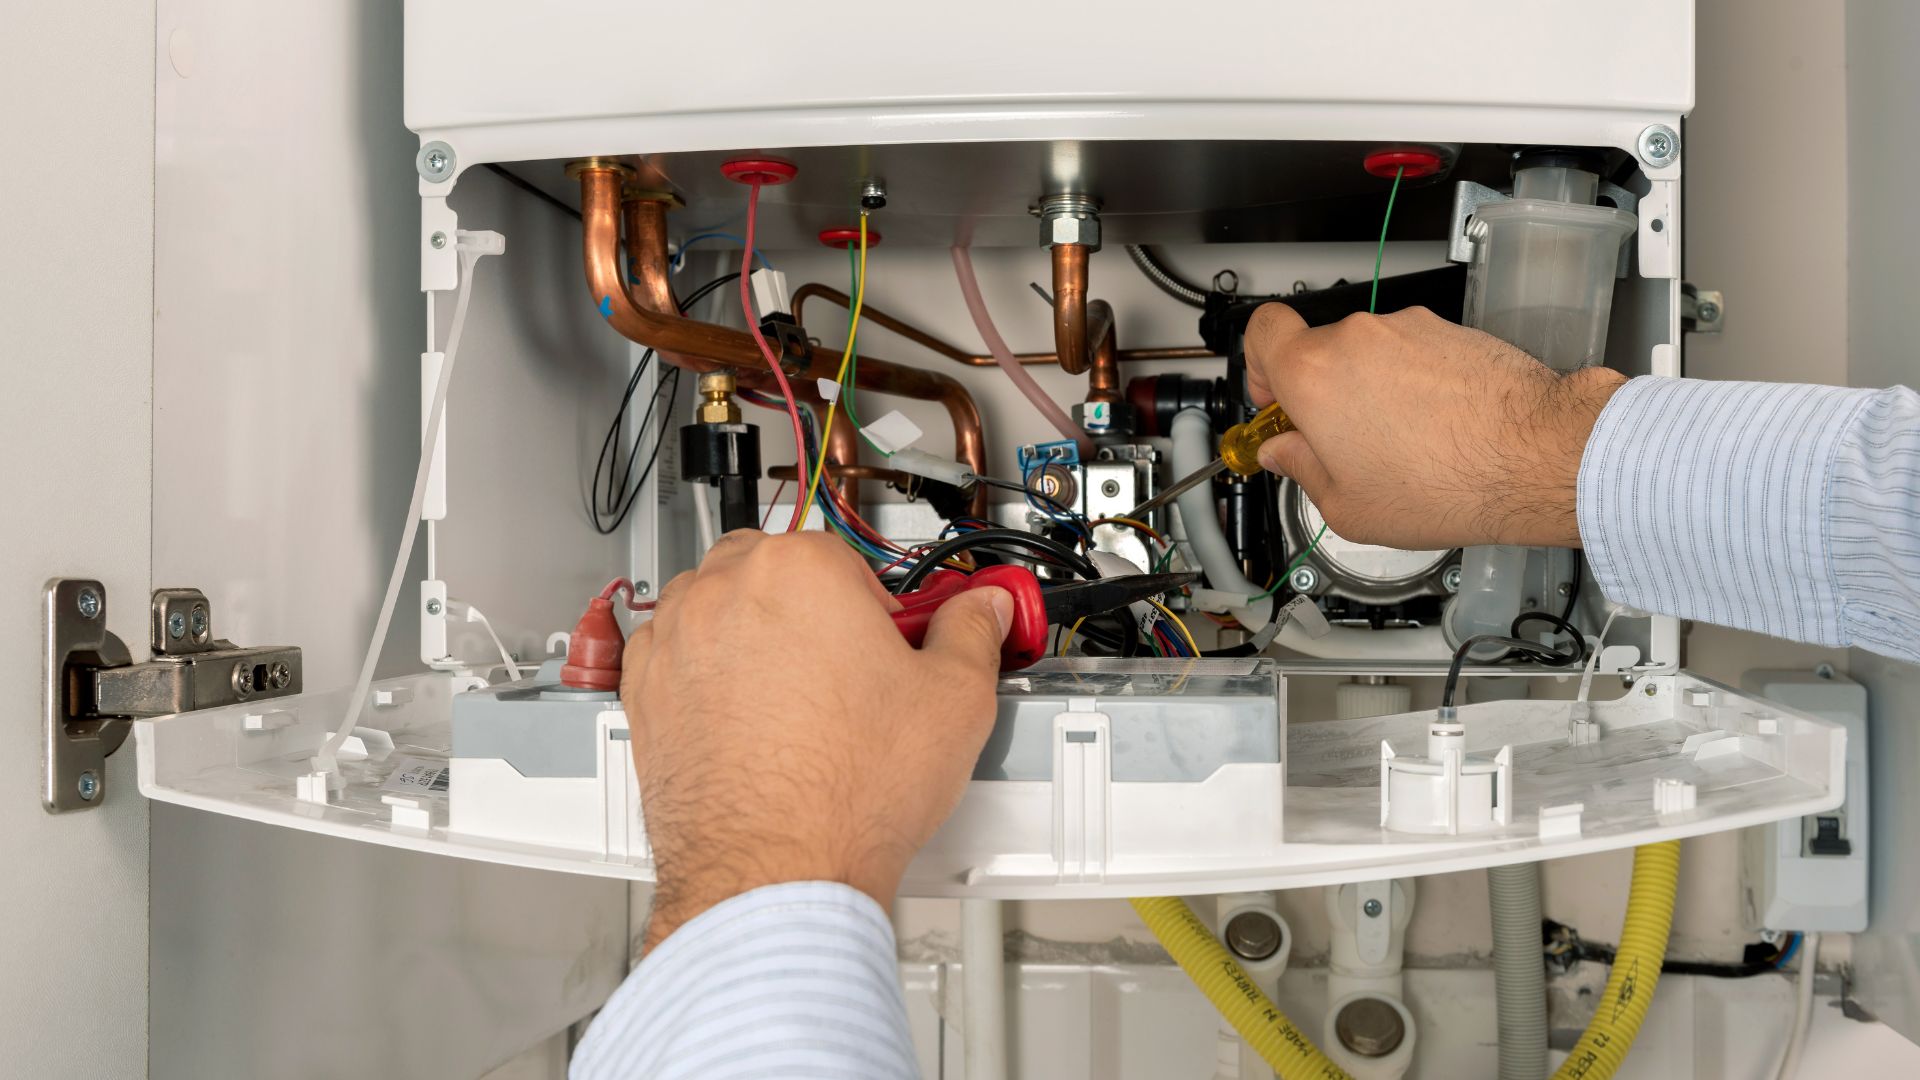 New Boiler Installations by Professional Plumbers